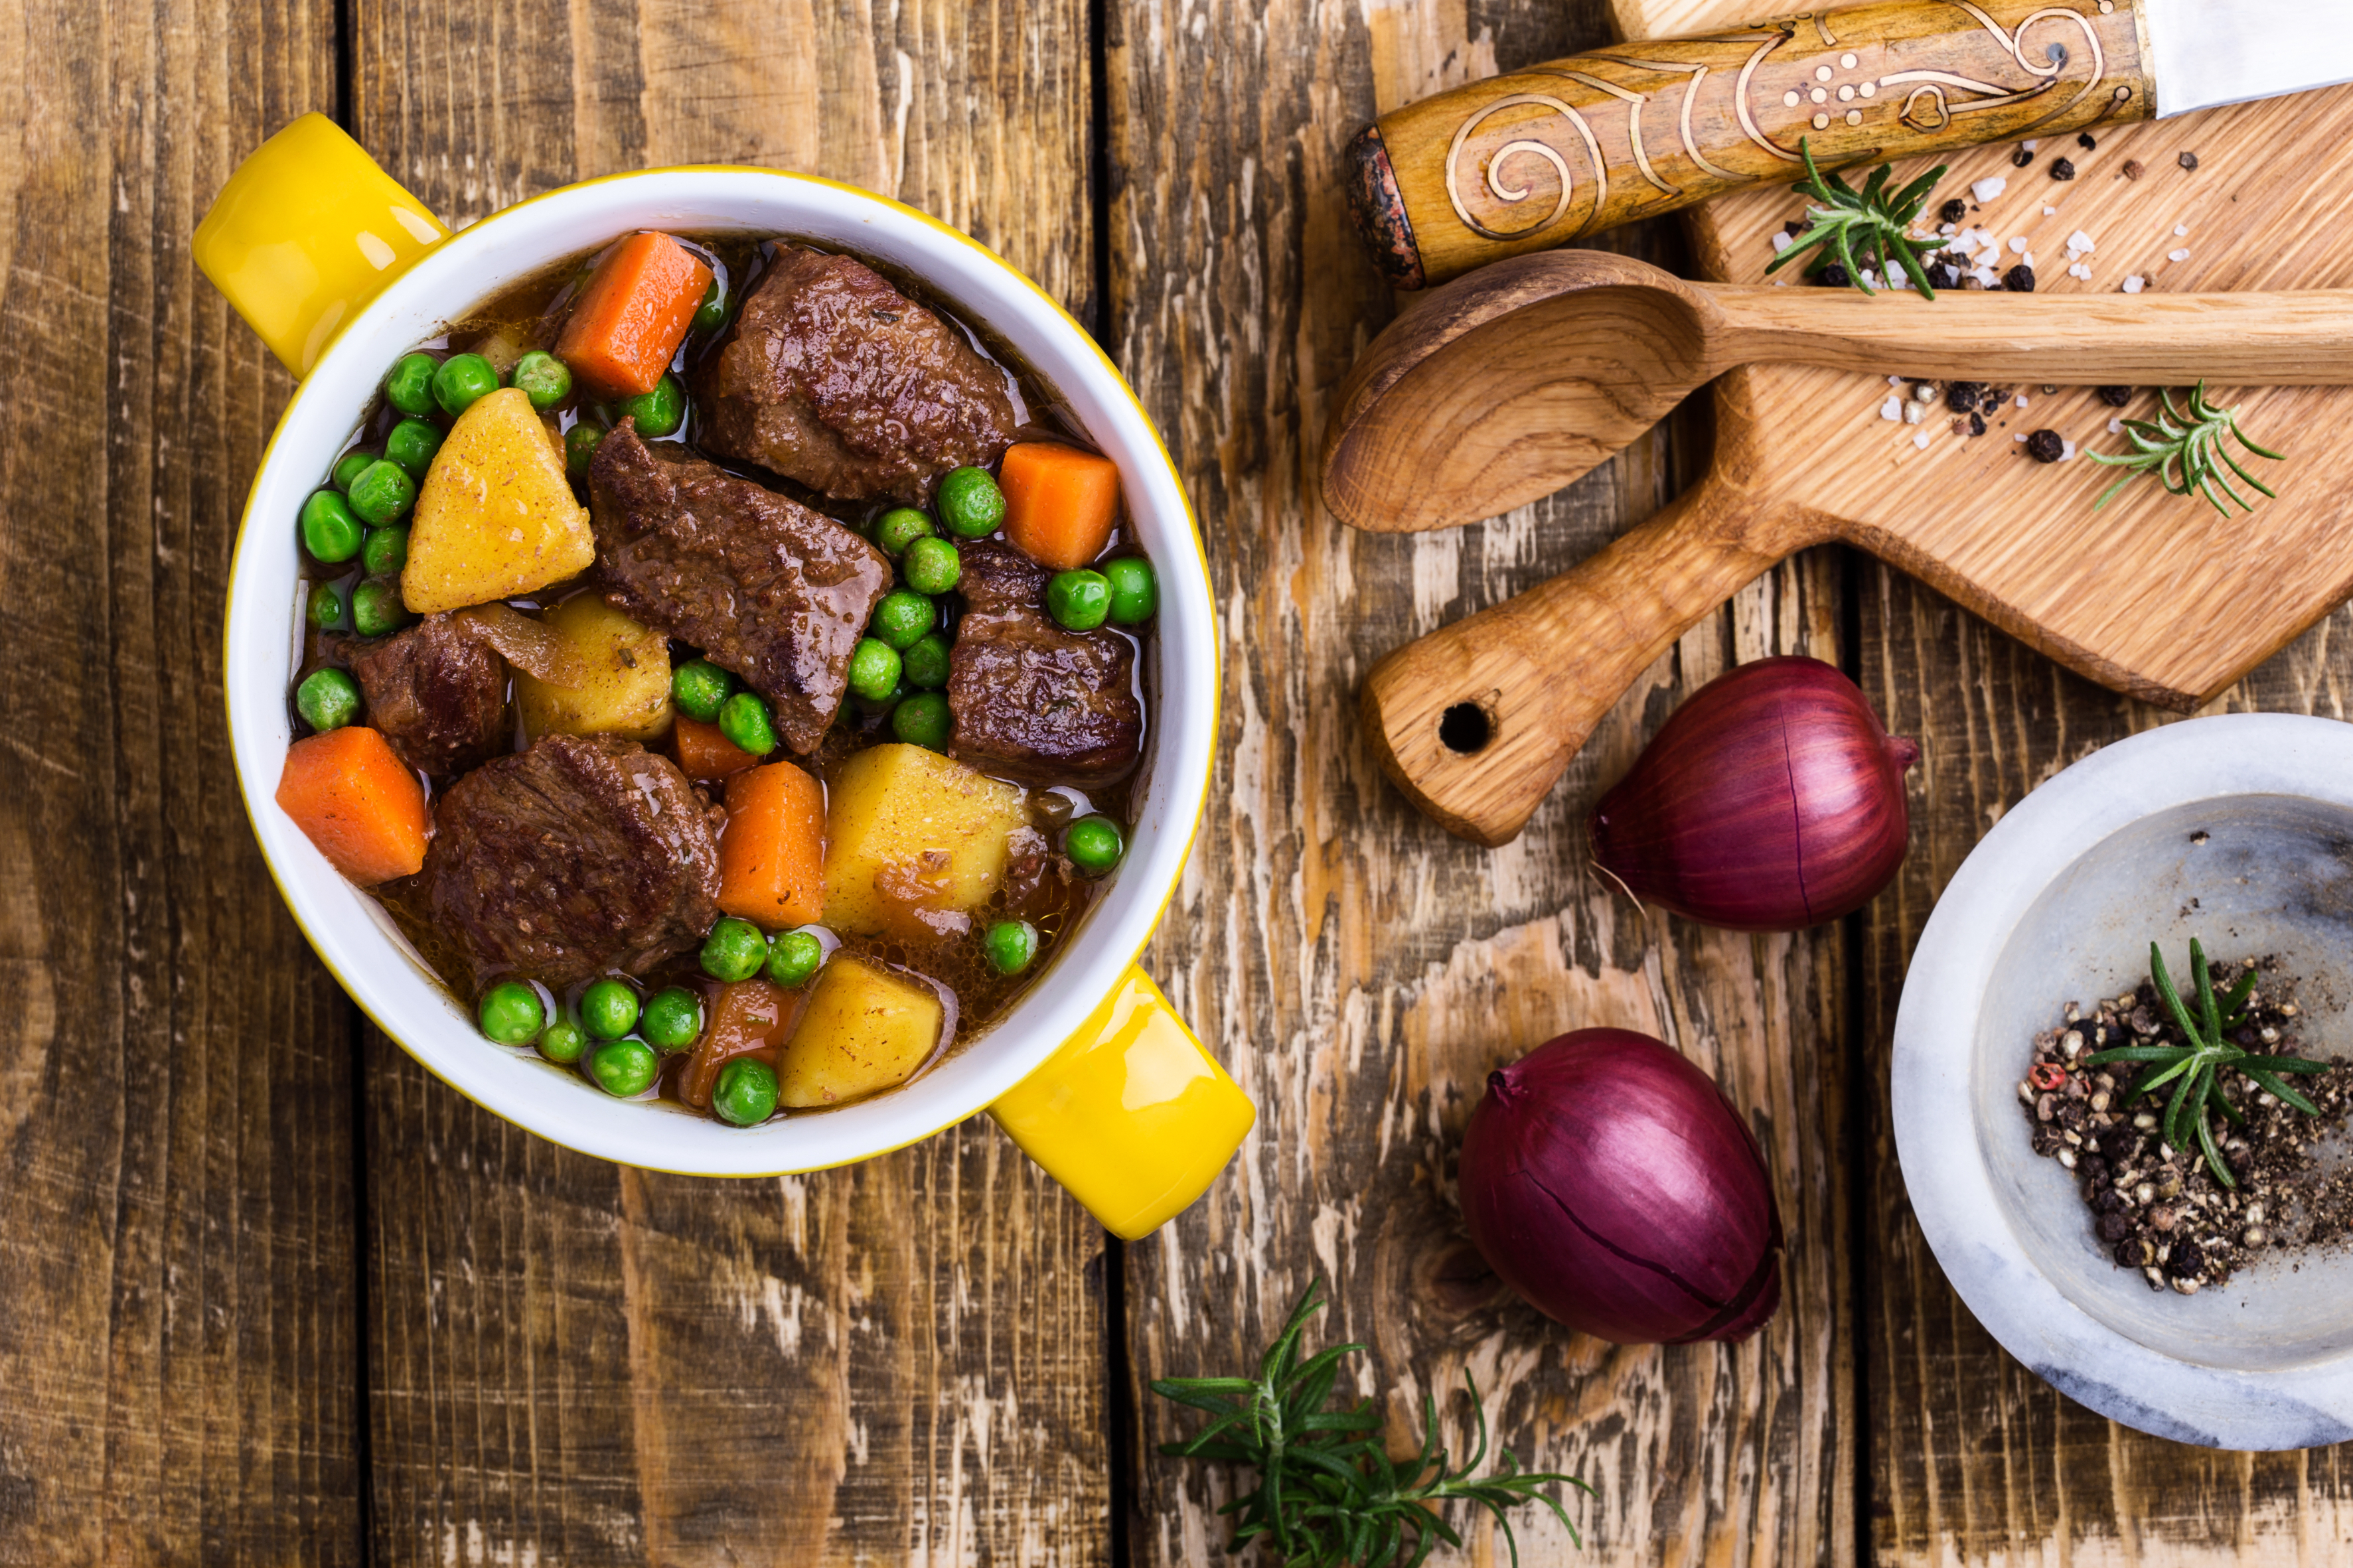 Bowl of beef stew with potatoes, carrots, and peas, alongside cooking utensils and herbs